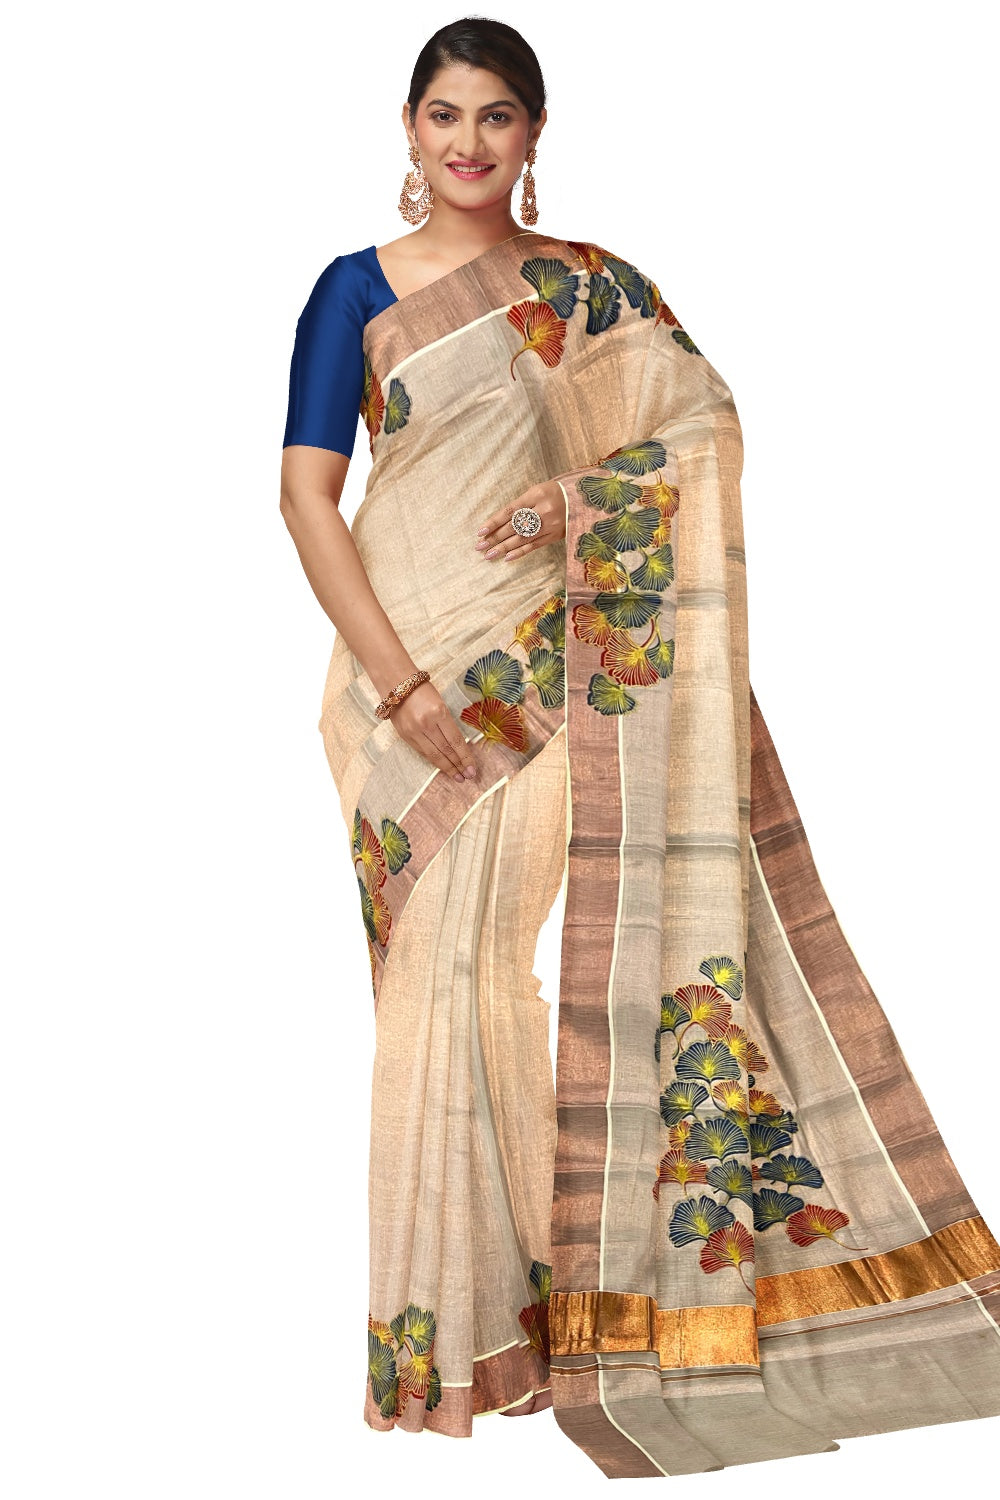 Kerala Copper Tissue Kasavu Saree With Mural Printed Blue and Red Floral Design